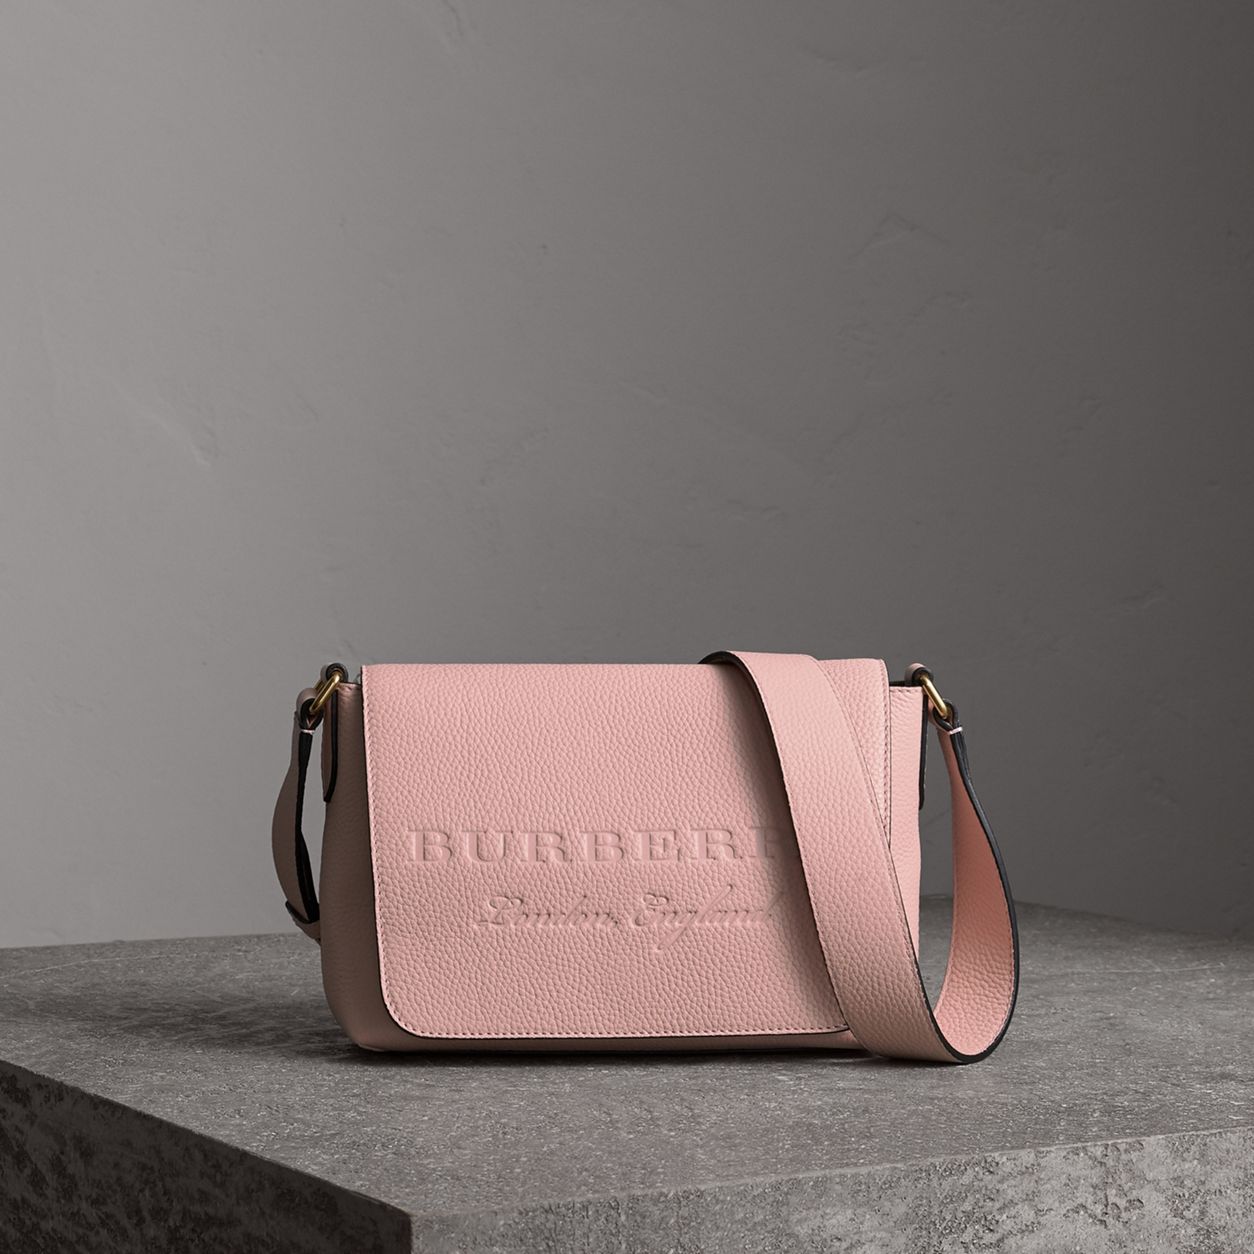 Burberry's small embossed leather messenger bag